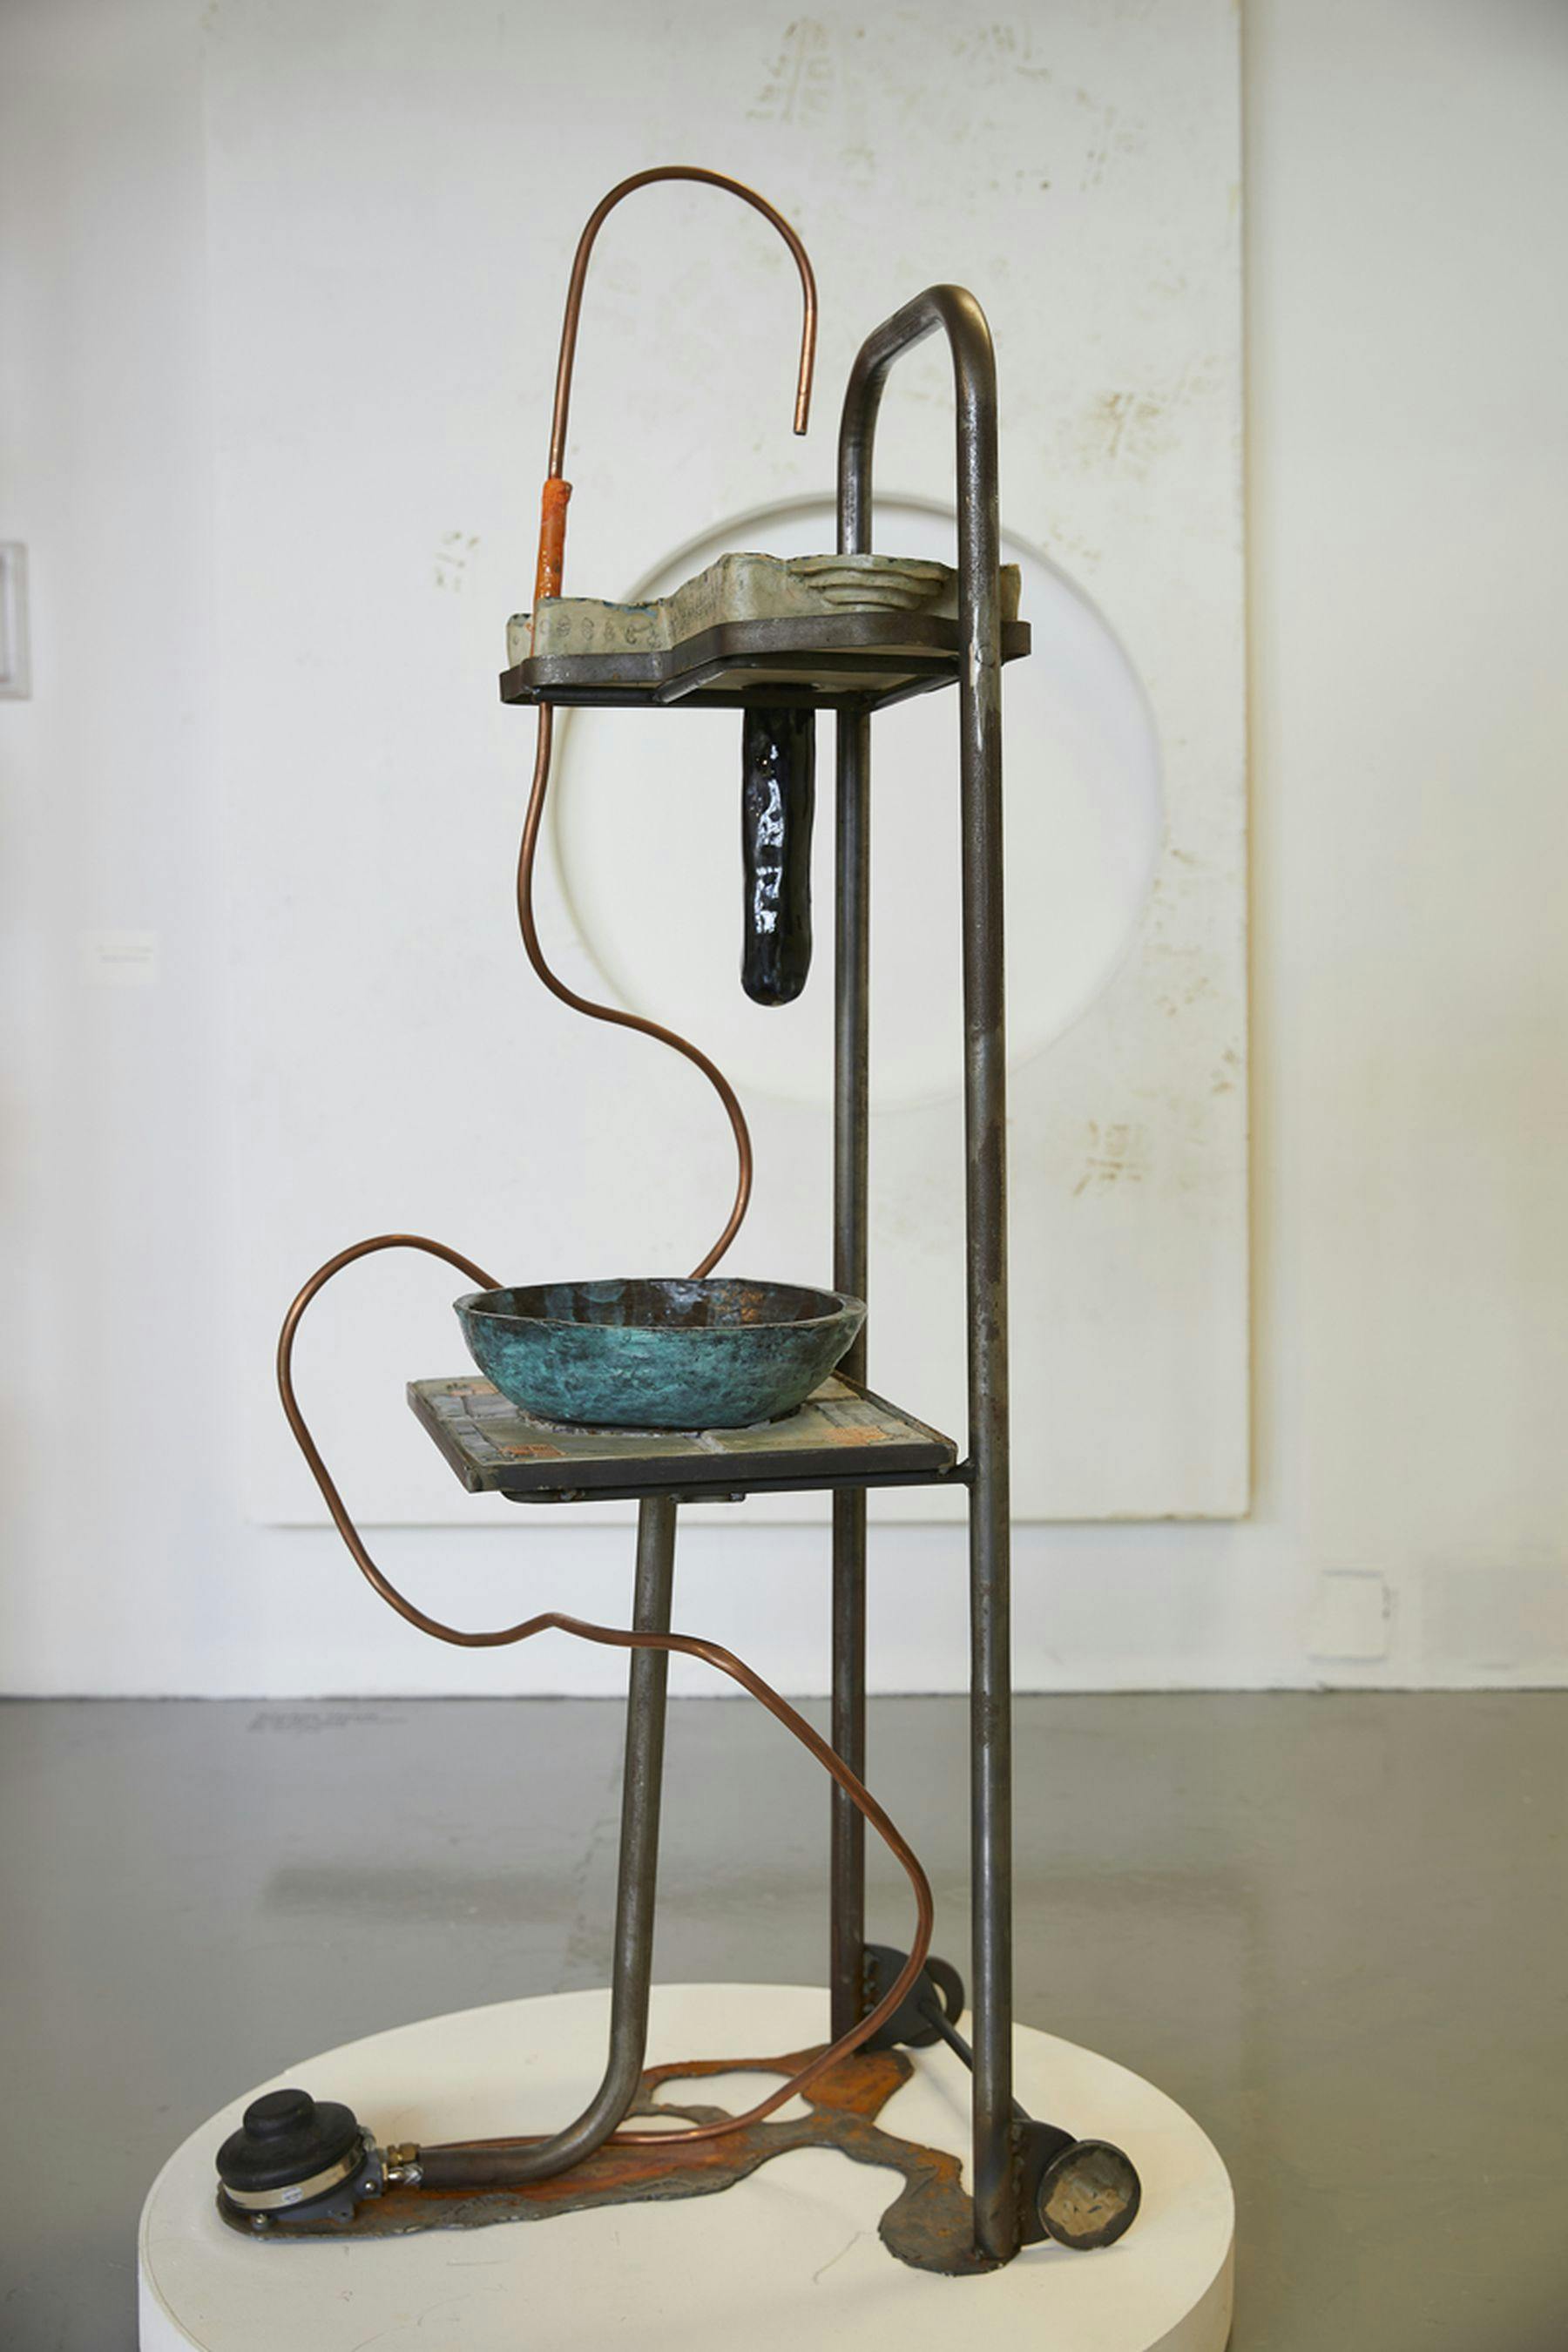 A photograph of a metal structure featuring a copper wire hook. Attached is a shelf with a blue bowl.